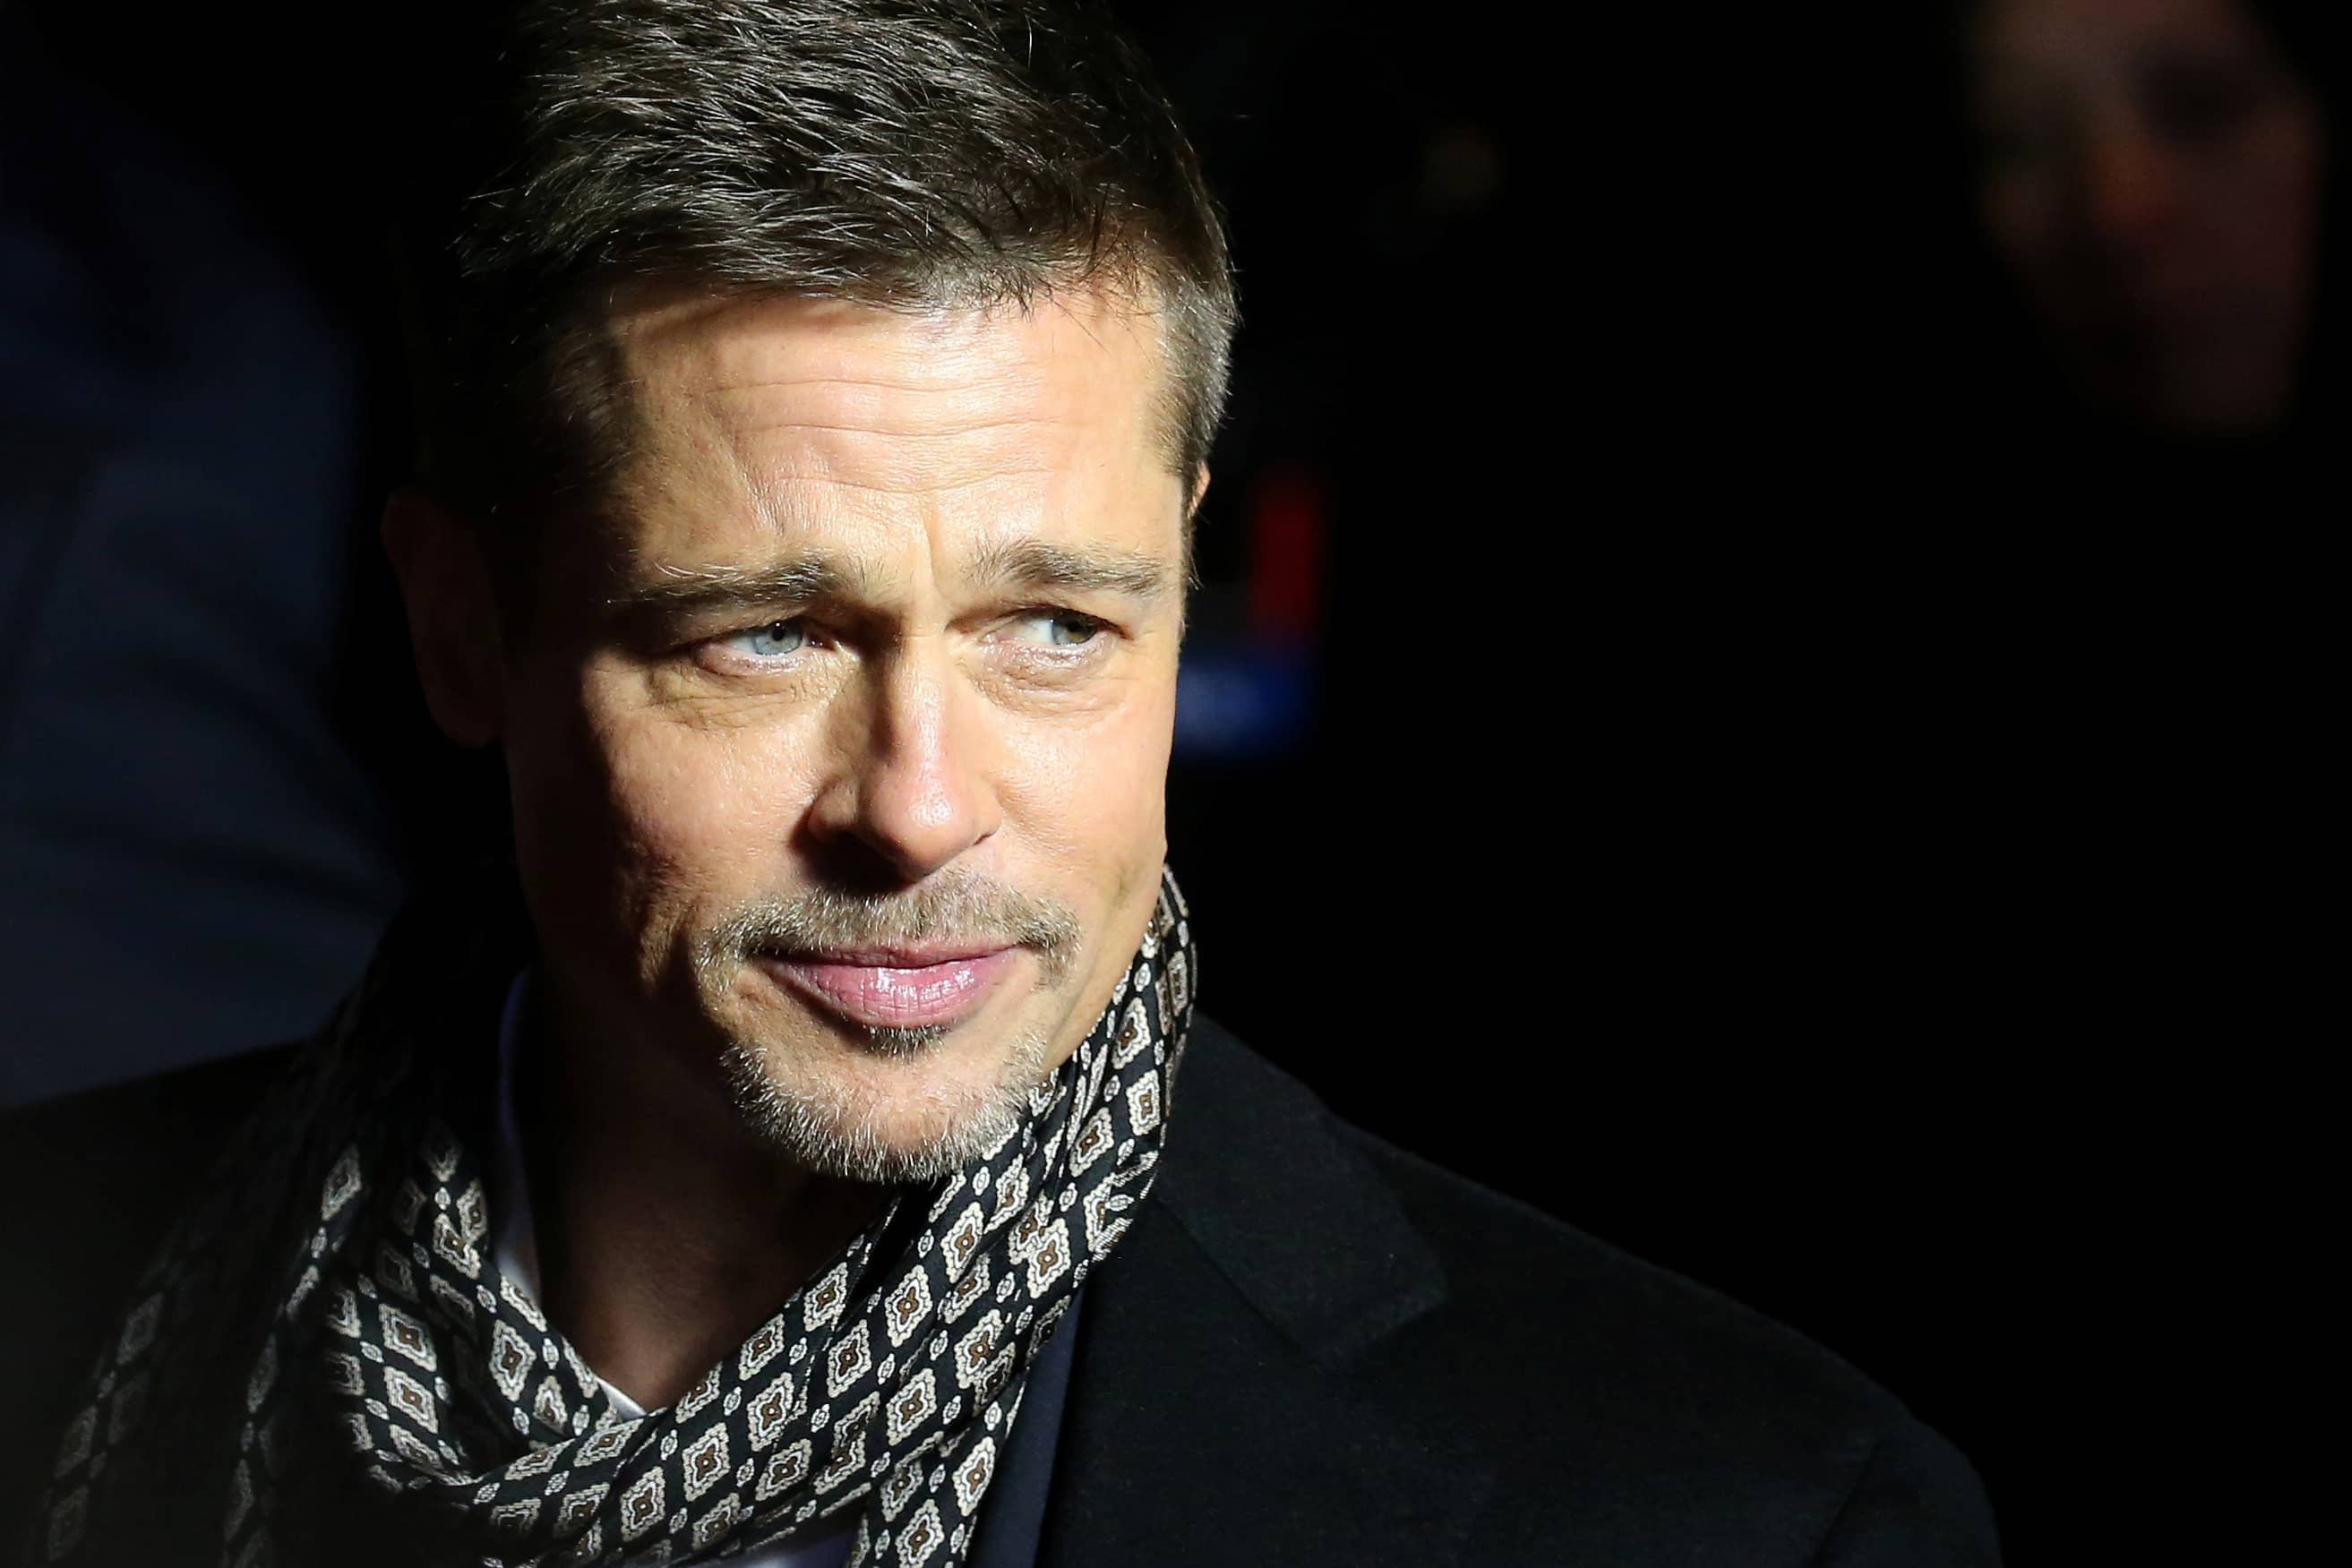 file-photo-of-actor-brad-pitt-arriving-at-the-premiere-of-the-film-allied-in-madrid